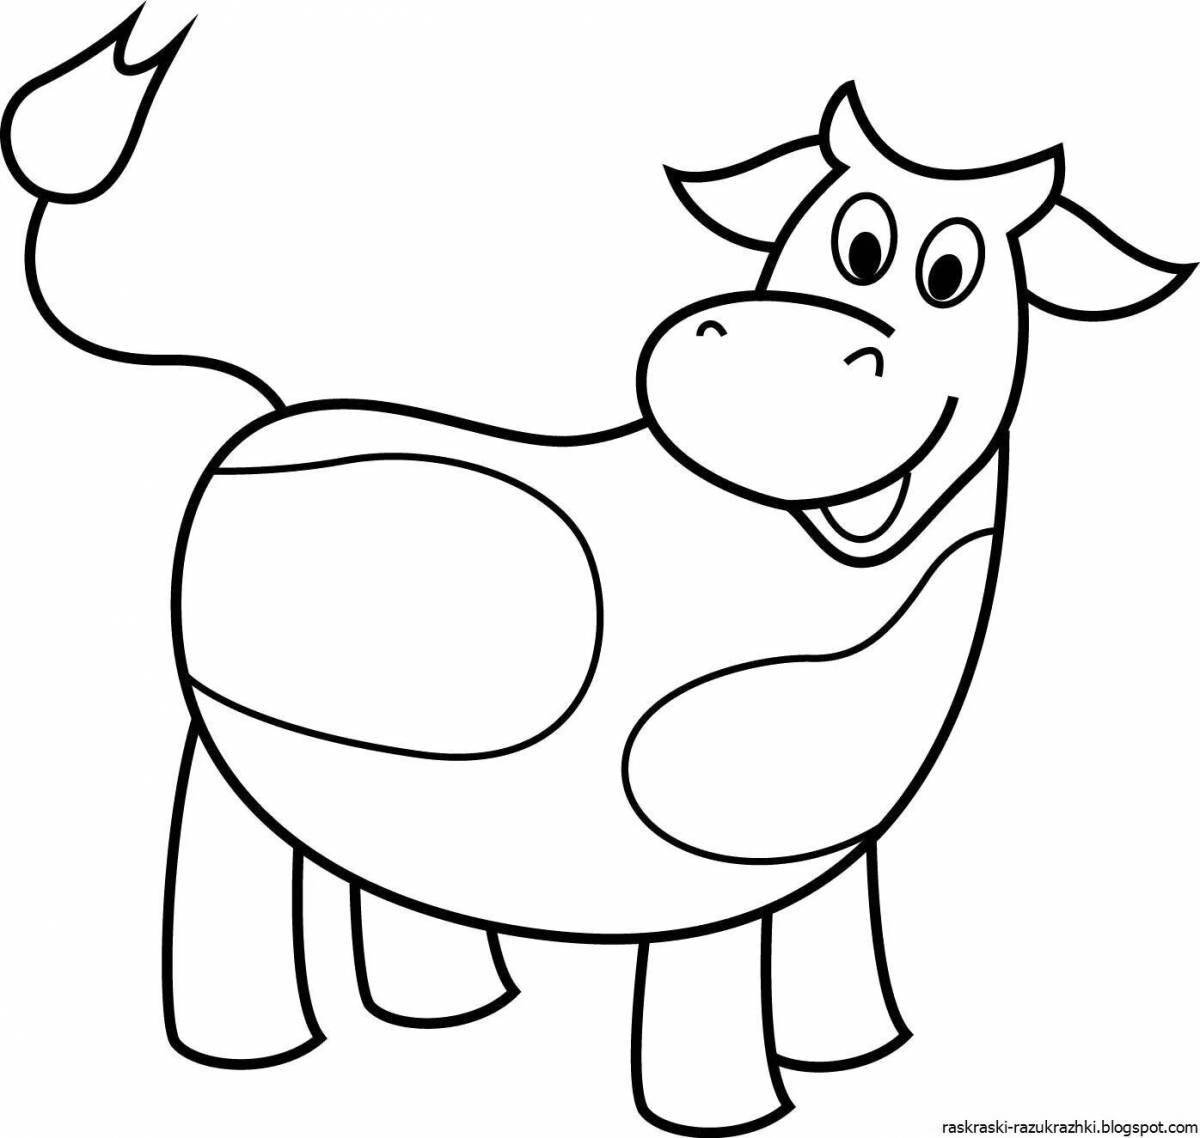 Glitter cow coloring book for kids